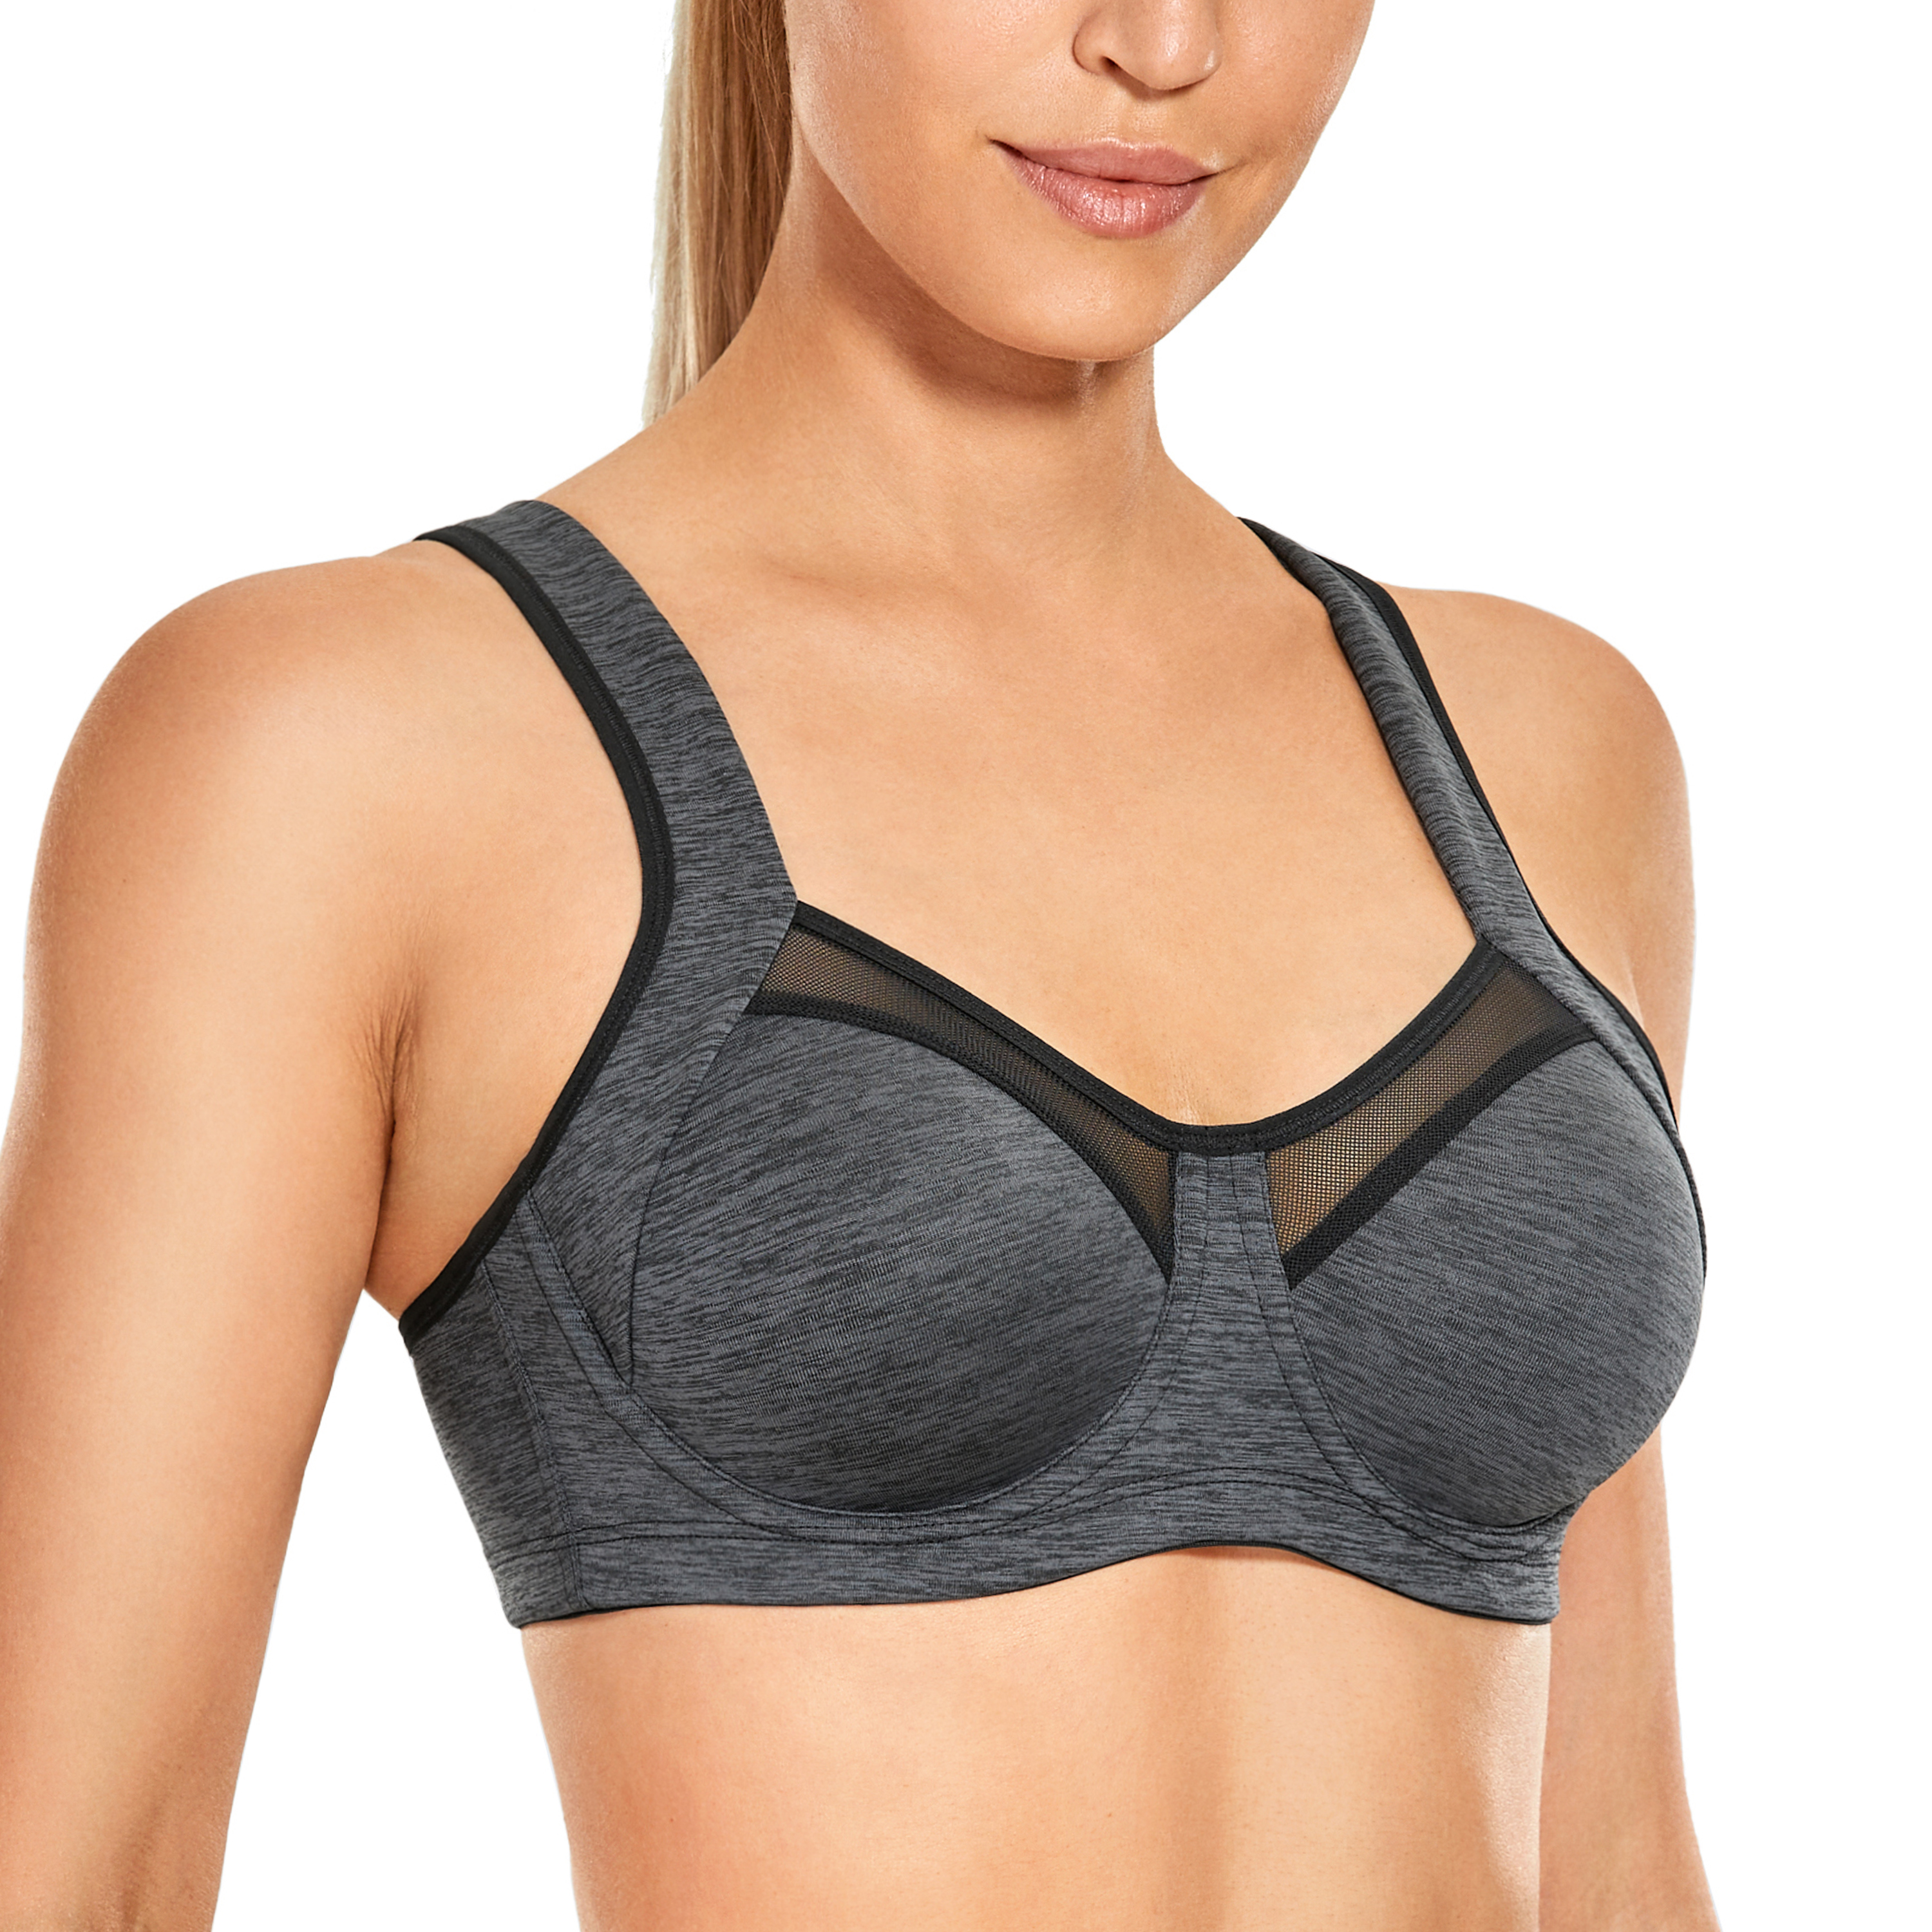 SYROKAN Coolmax High Impact Sports Bras for Women Underwire Full Figure Running Workout 